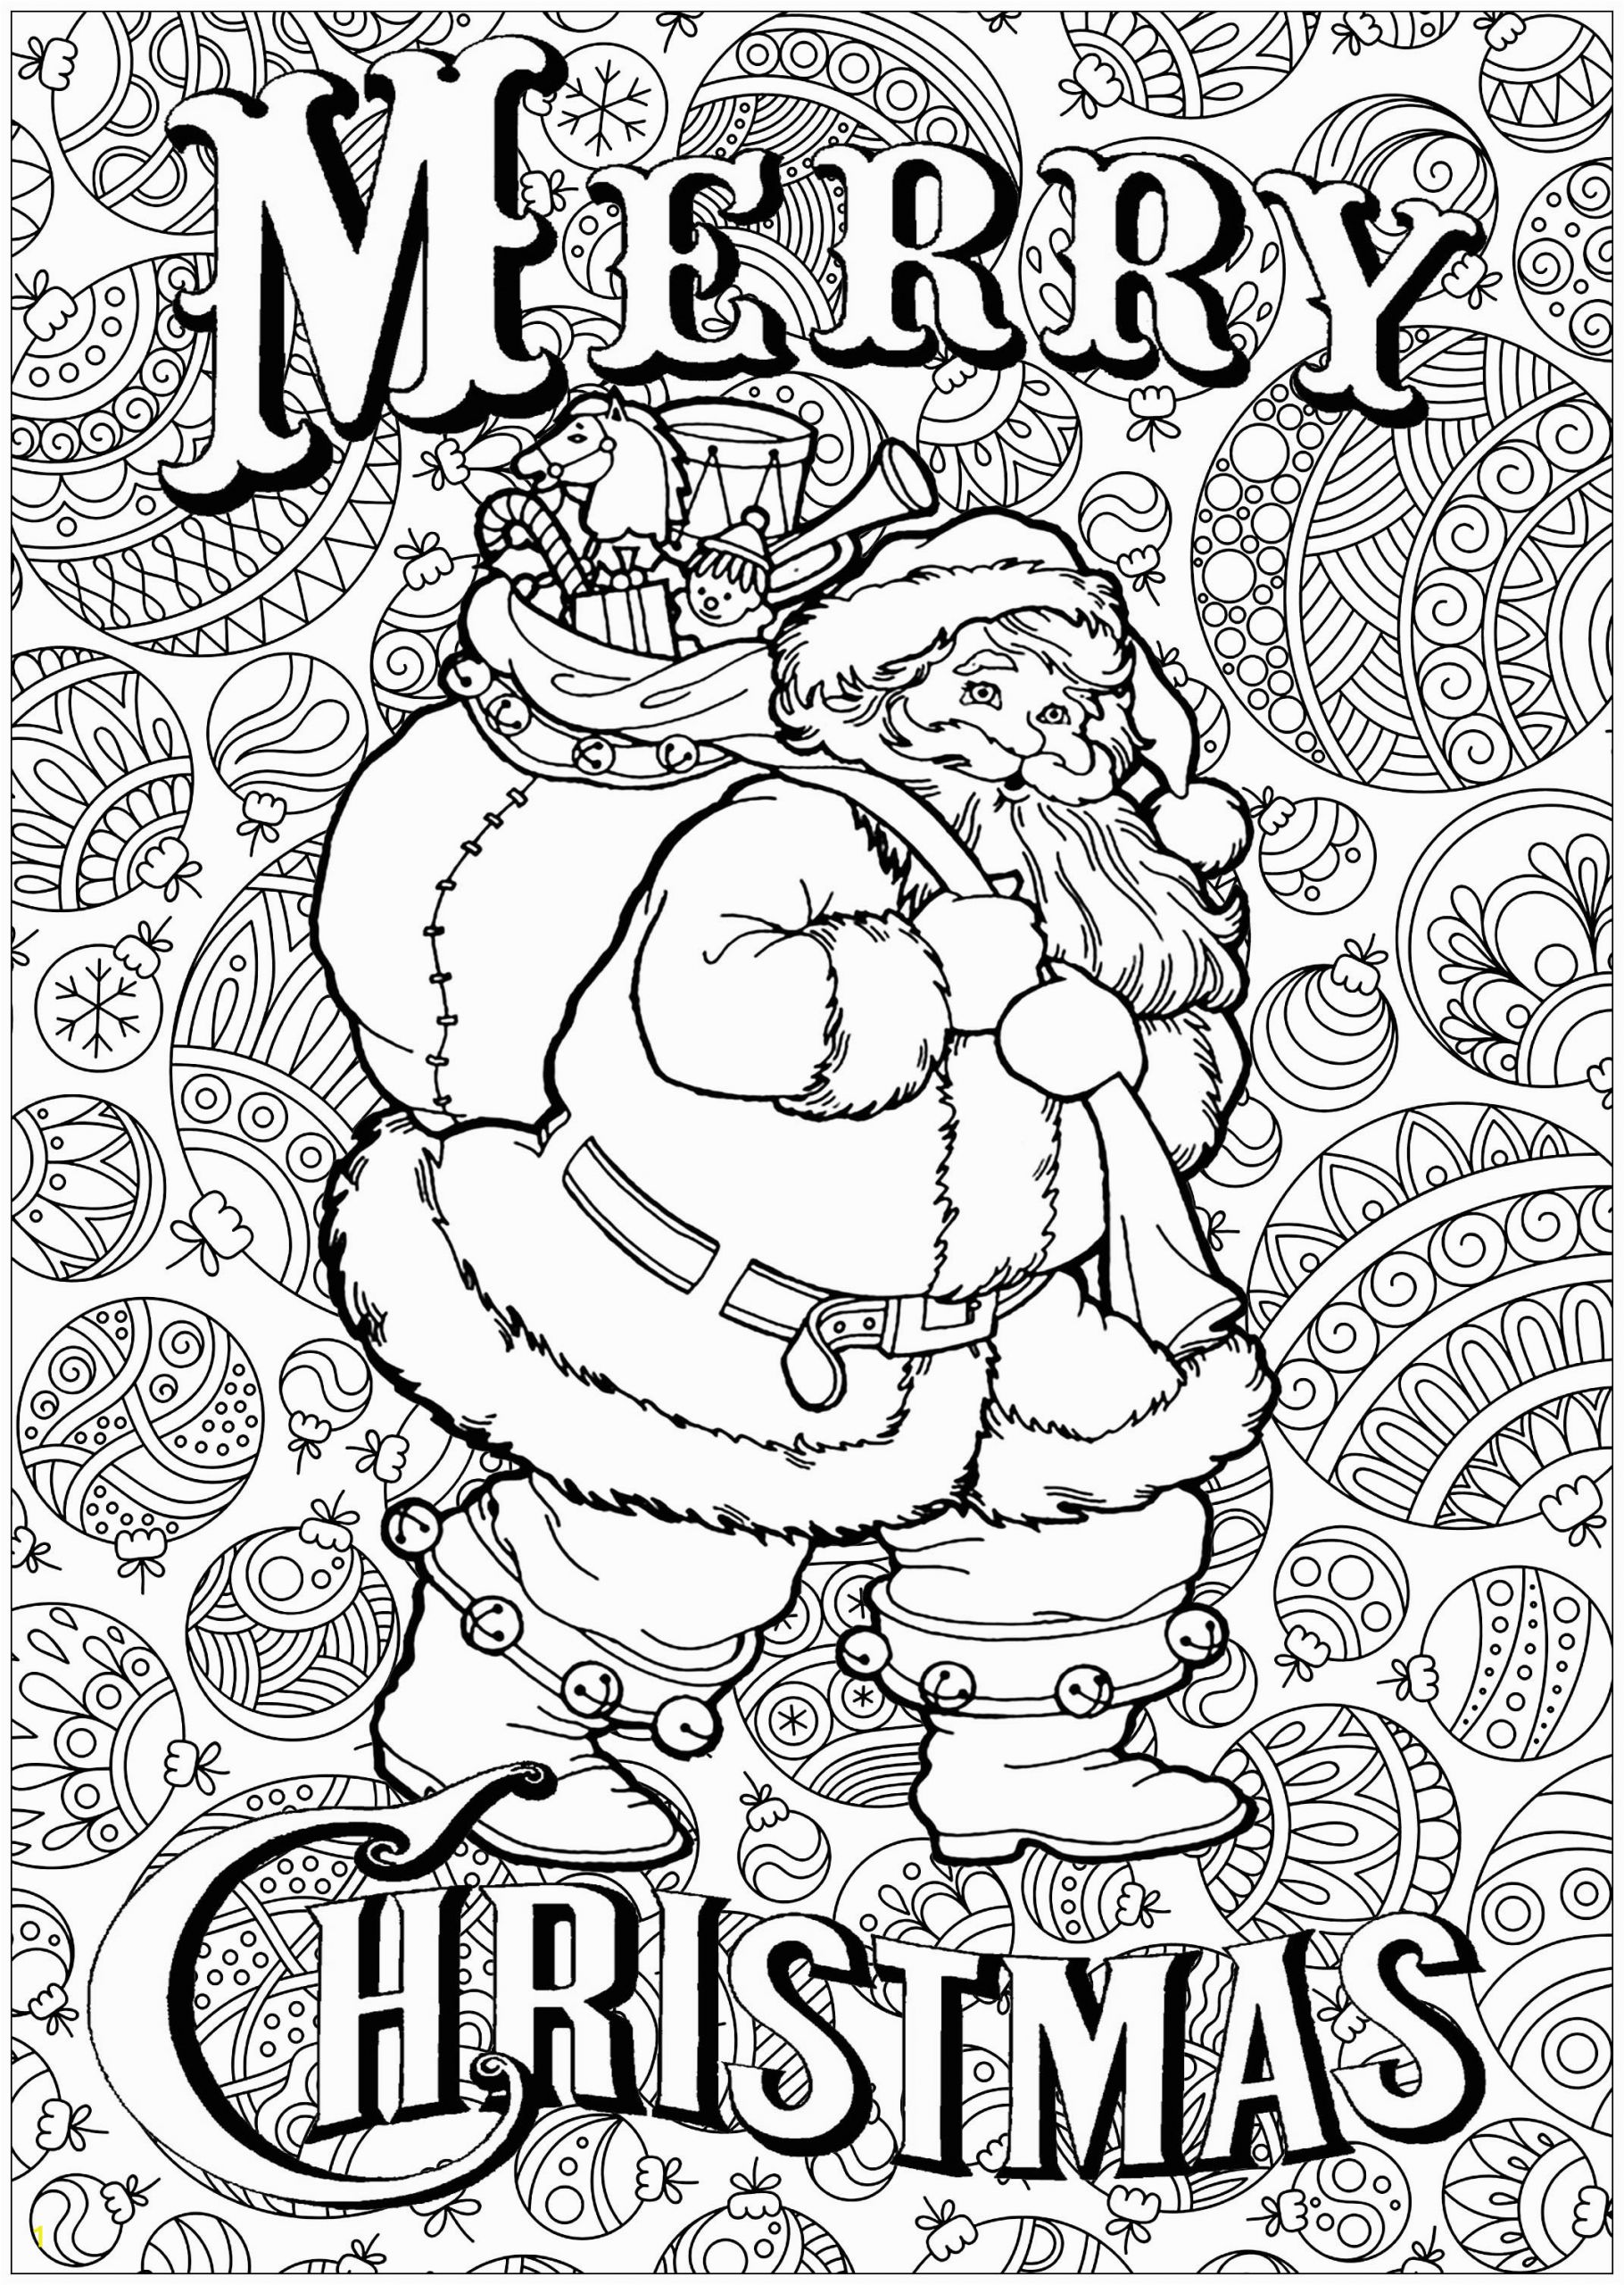 Detailed Christmas Coloring Pages for Adults Relaxing Holiday Coloring Pages 12 Christmas Adult